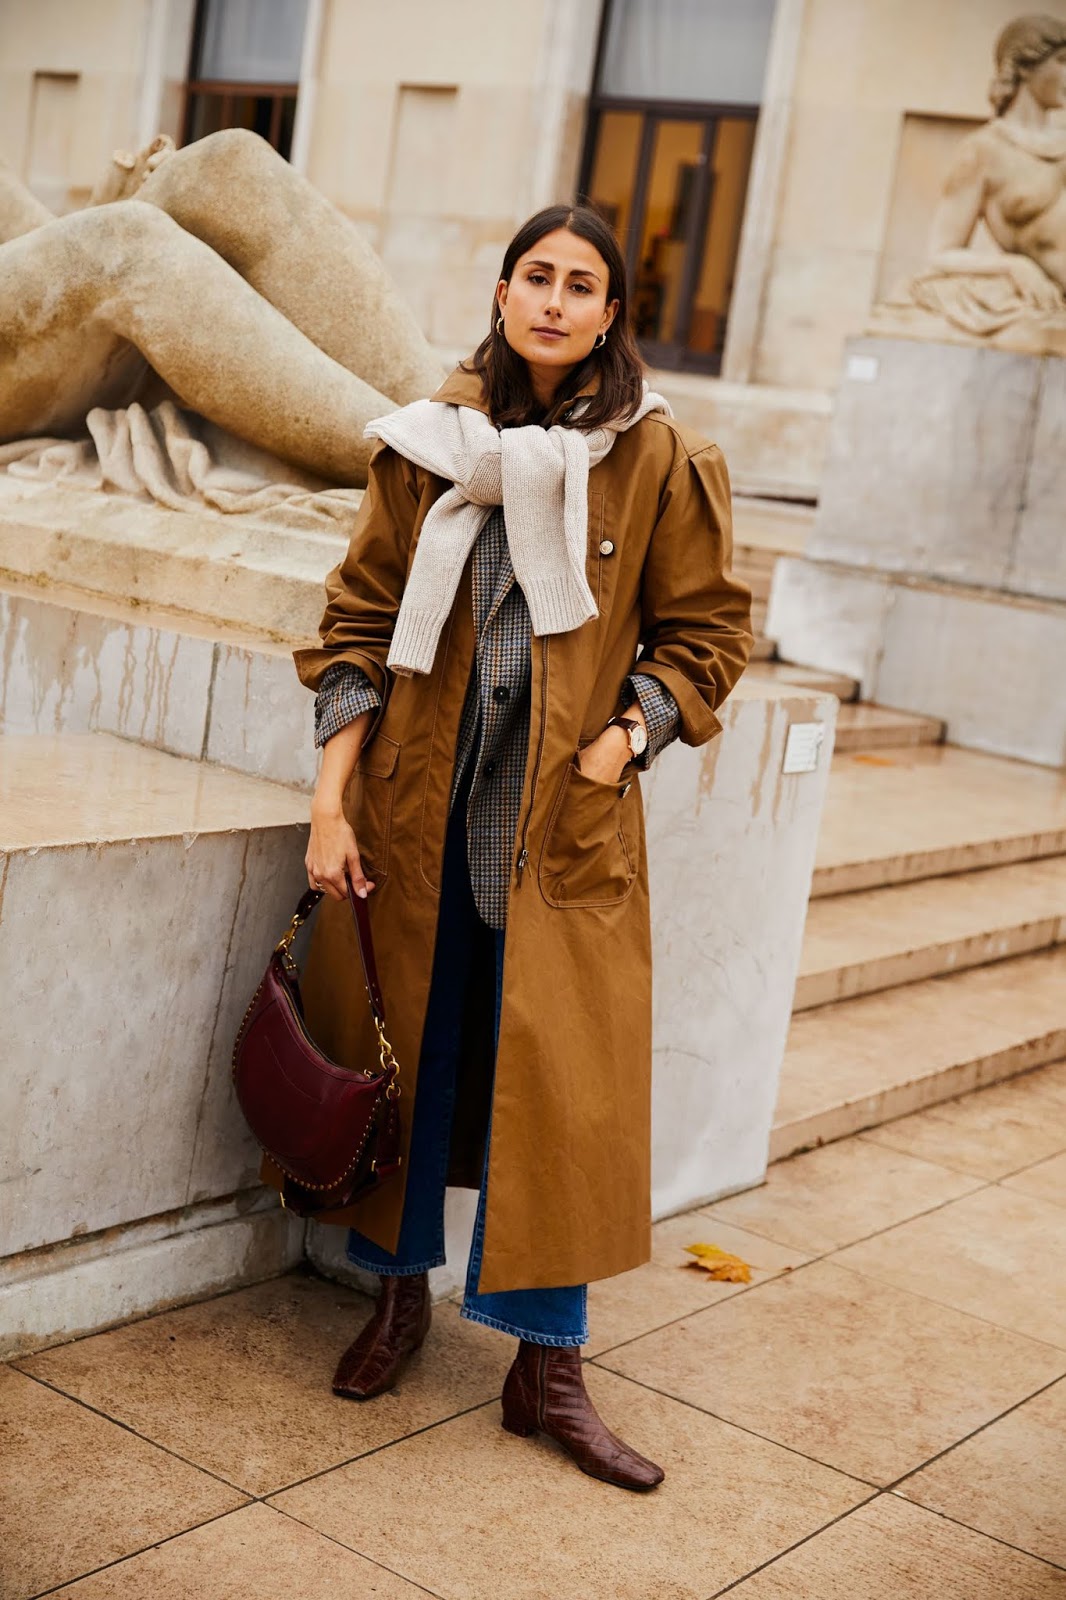 This Layered Street Style Outfit Is the Epitome of Chic